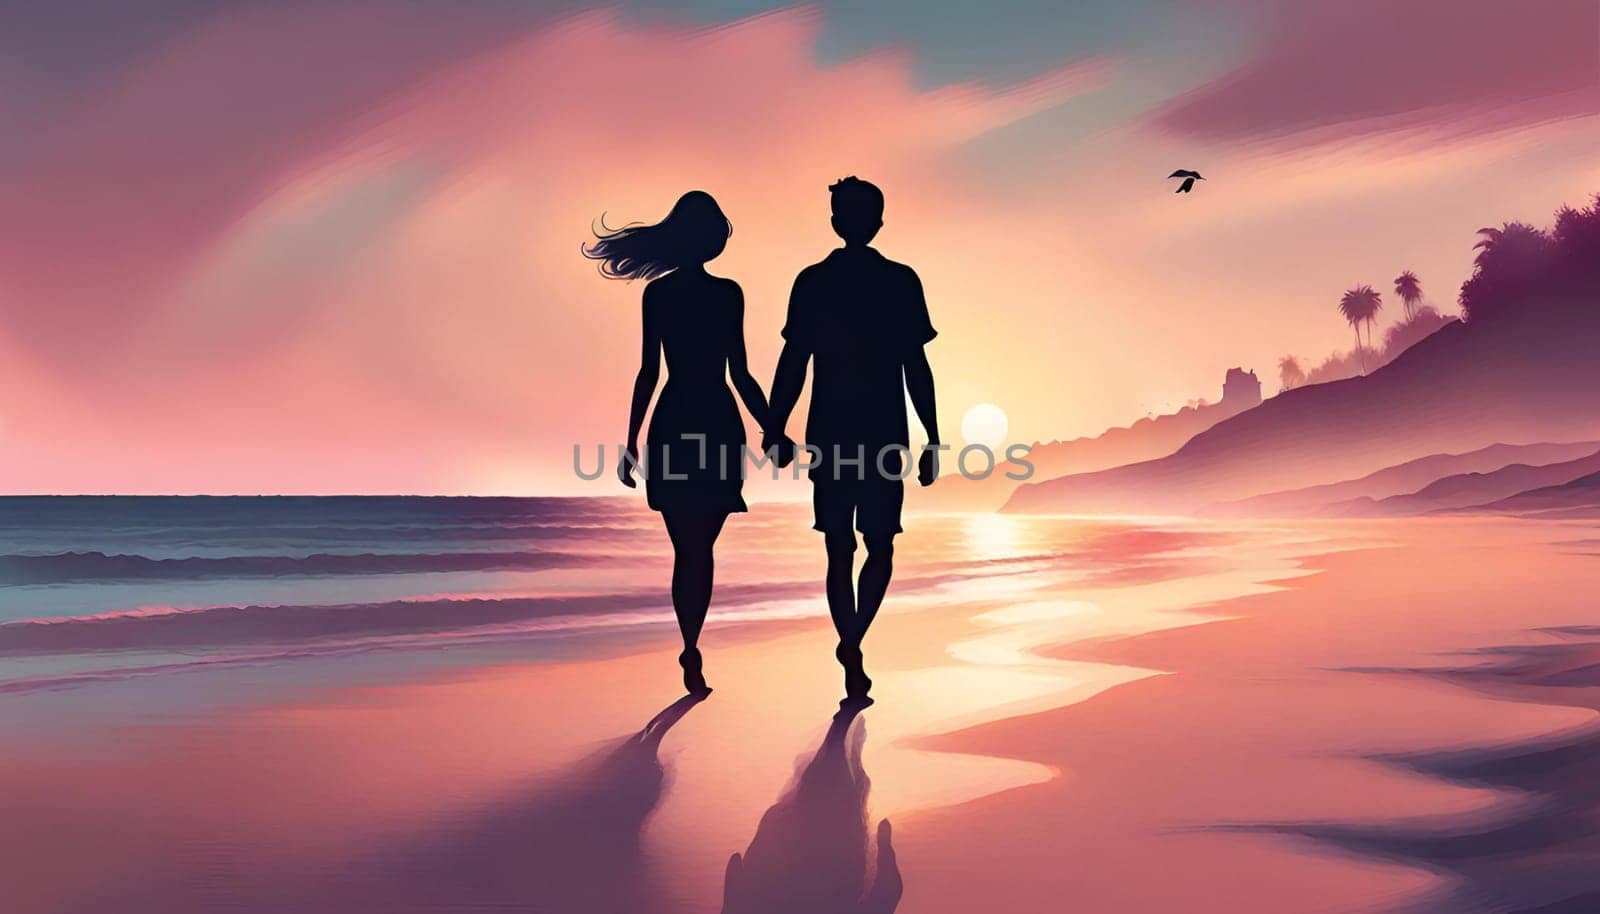 A couple on a beach at sunset. Happy Valentine's Day.